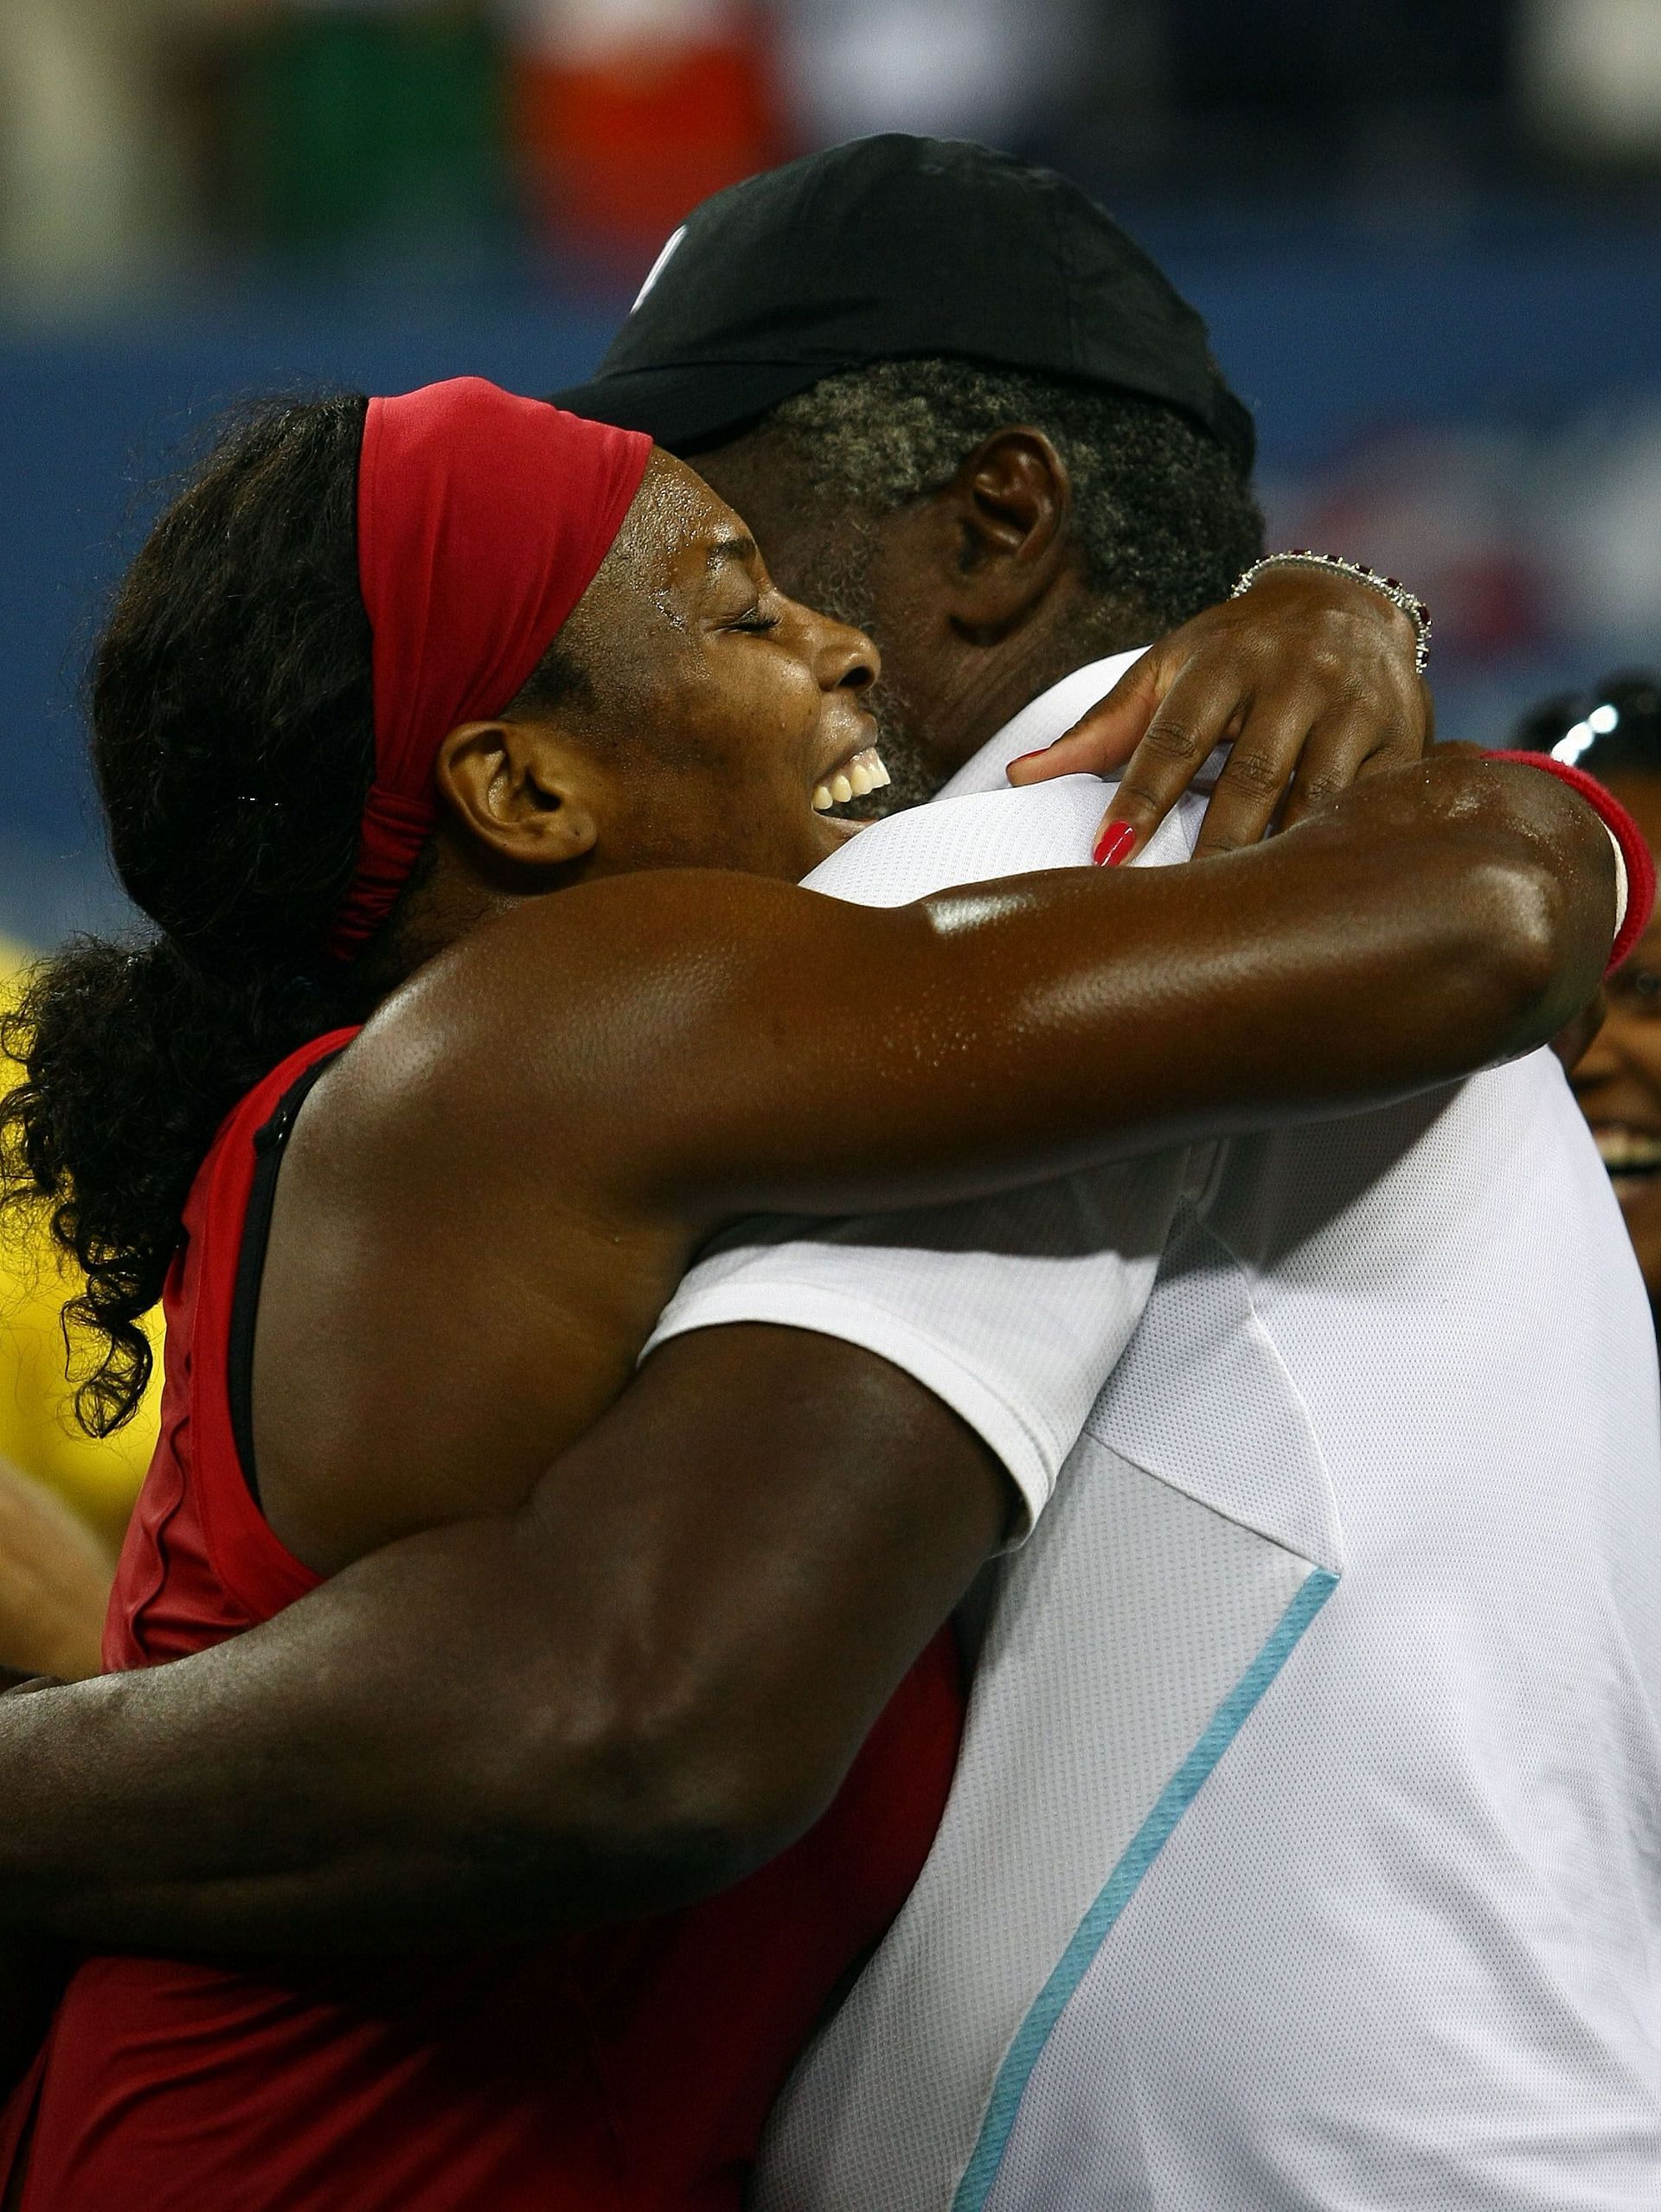 Father and daughter share a hug after Serena Williams won the 2008 US Open.